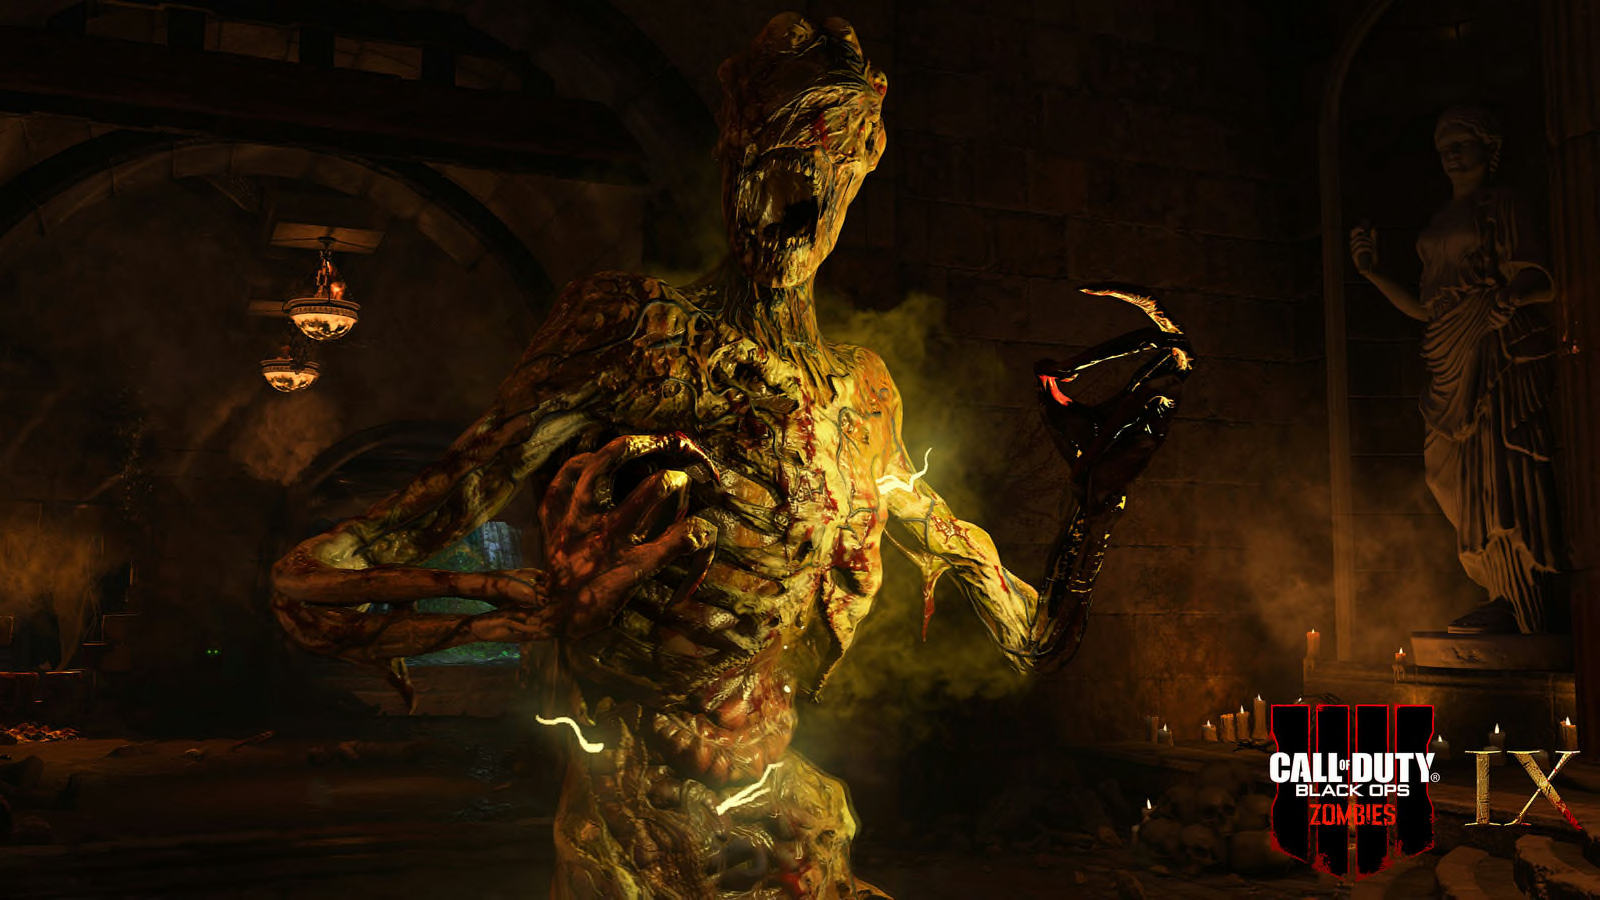 download call of duty black ops zombies pc